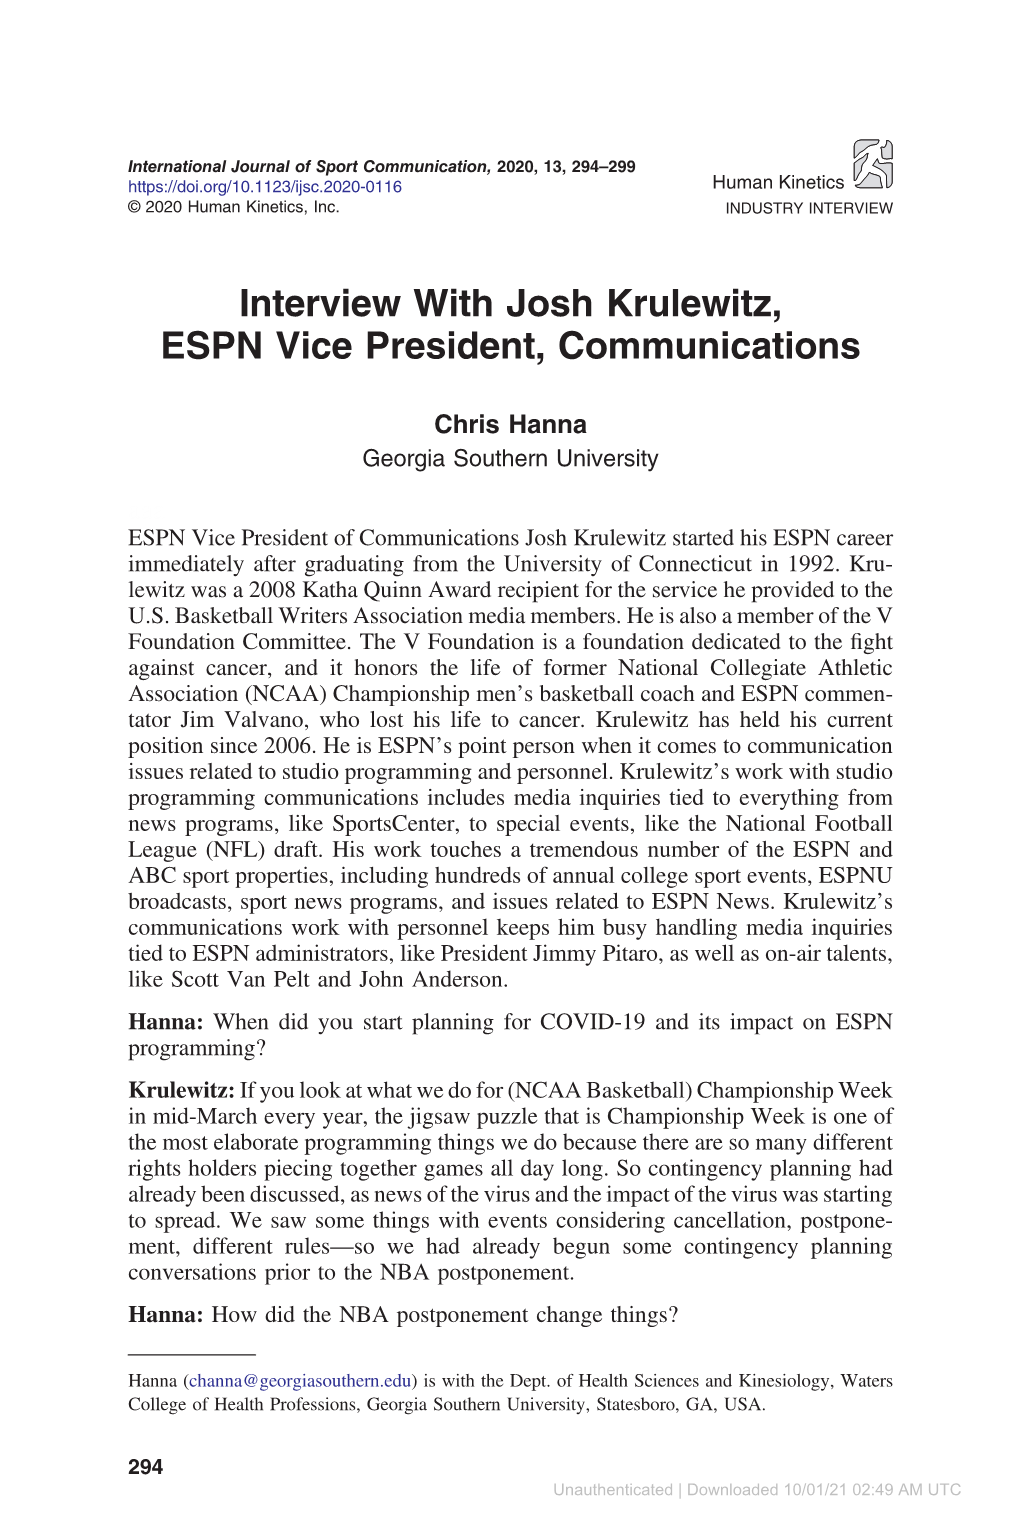 Interview with Josh Krulewitz, ESPN Vice President, Communications